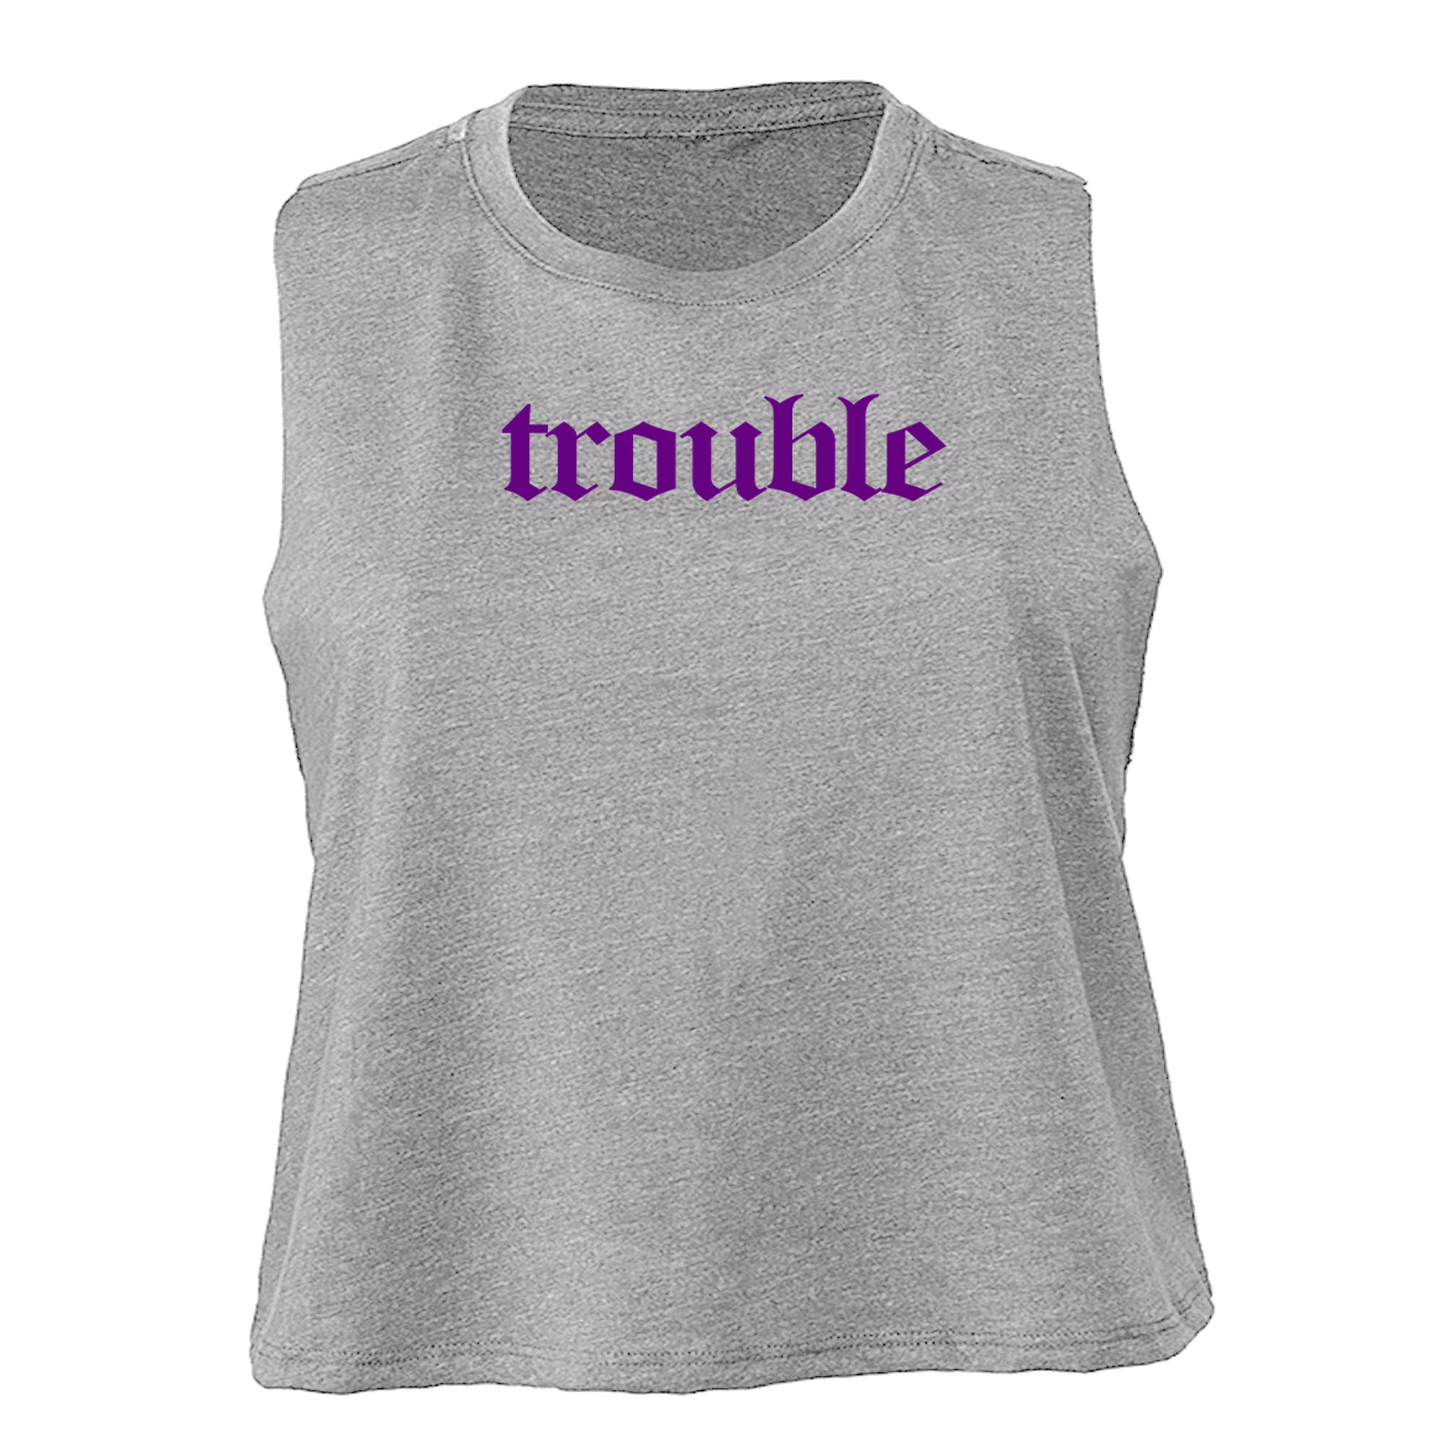 Unruly Trouble - Women's Sleeveless Crop Top - Grey